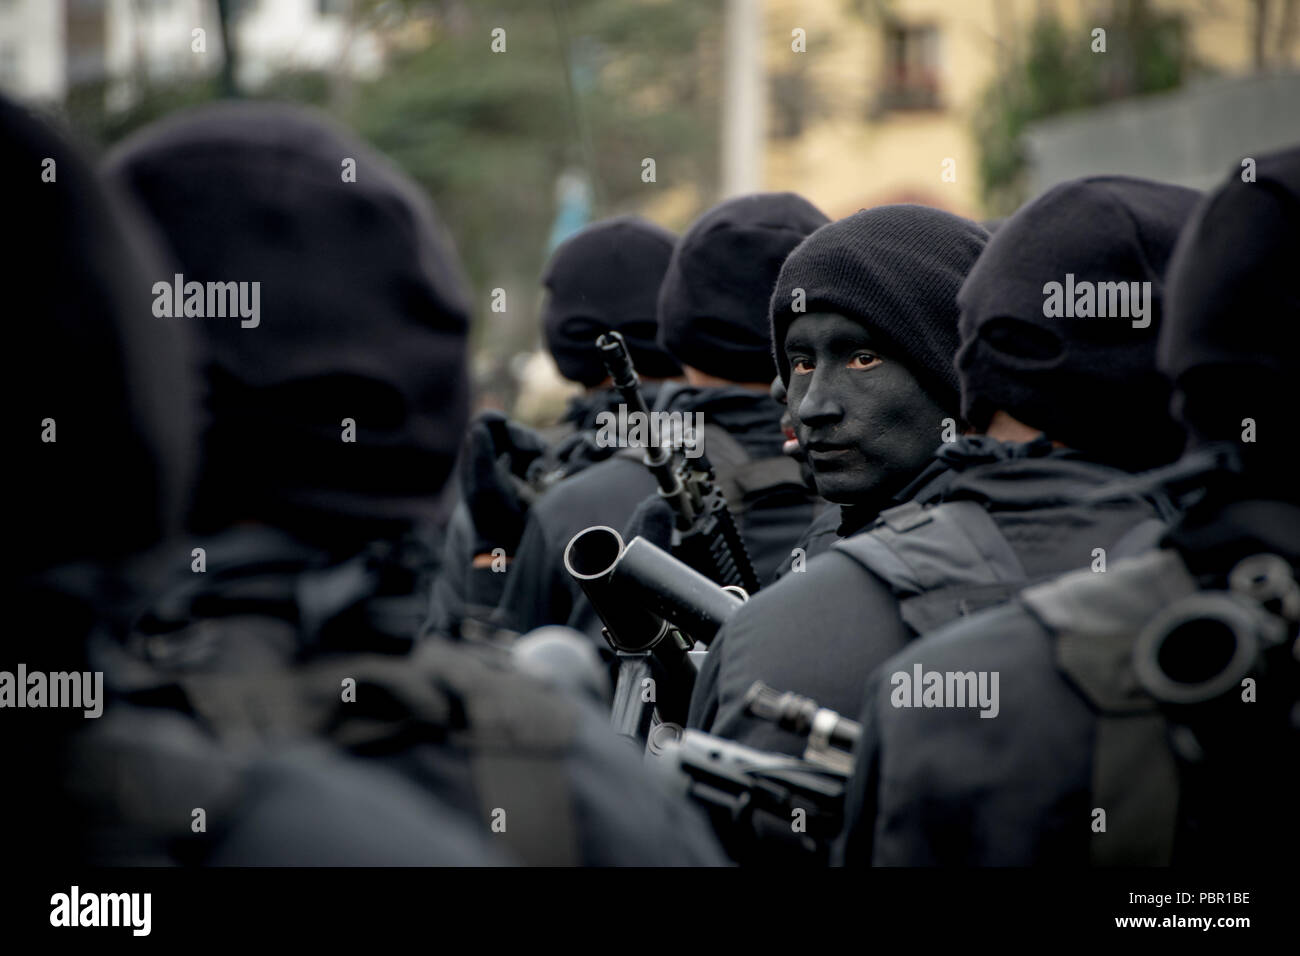 Lima, Lima Region, Peru. 29th July, 2018. Peruvian special forces with fearsome face paint seen marching.Members of Peru's armed forces, coastguard, search & rescue, and police march in full uniform during the country's Gran Parada Militar. This parade always occurs the day after Peru's Independence Day marking the official end of festivities across the nation. Credit: Jason Sheil/SOPA Images/ZUMA Wire/Alamy Live News Stock Photo